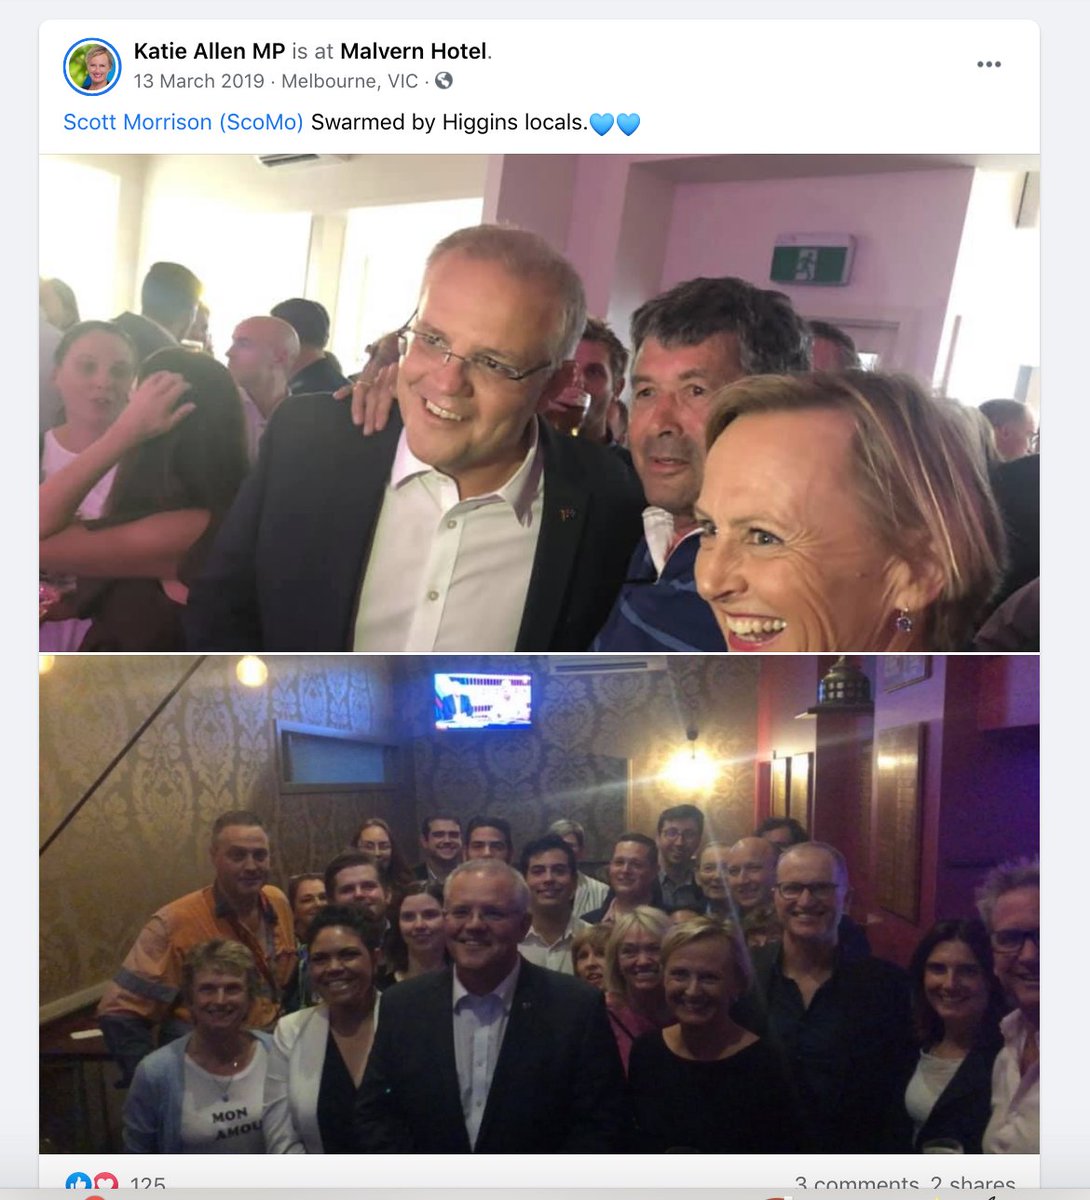 As of course was Lib MP Katie Allen who happened to randomly find herself at - guess where? - the Malvern Hotel with Scott Morrison last year just before the federal election. And posted about it all on Facebook in a very random, and totally uncoordinated fashion.